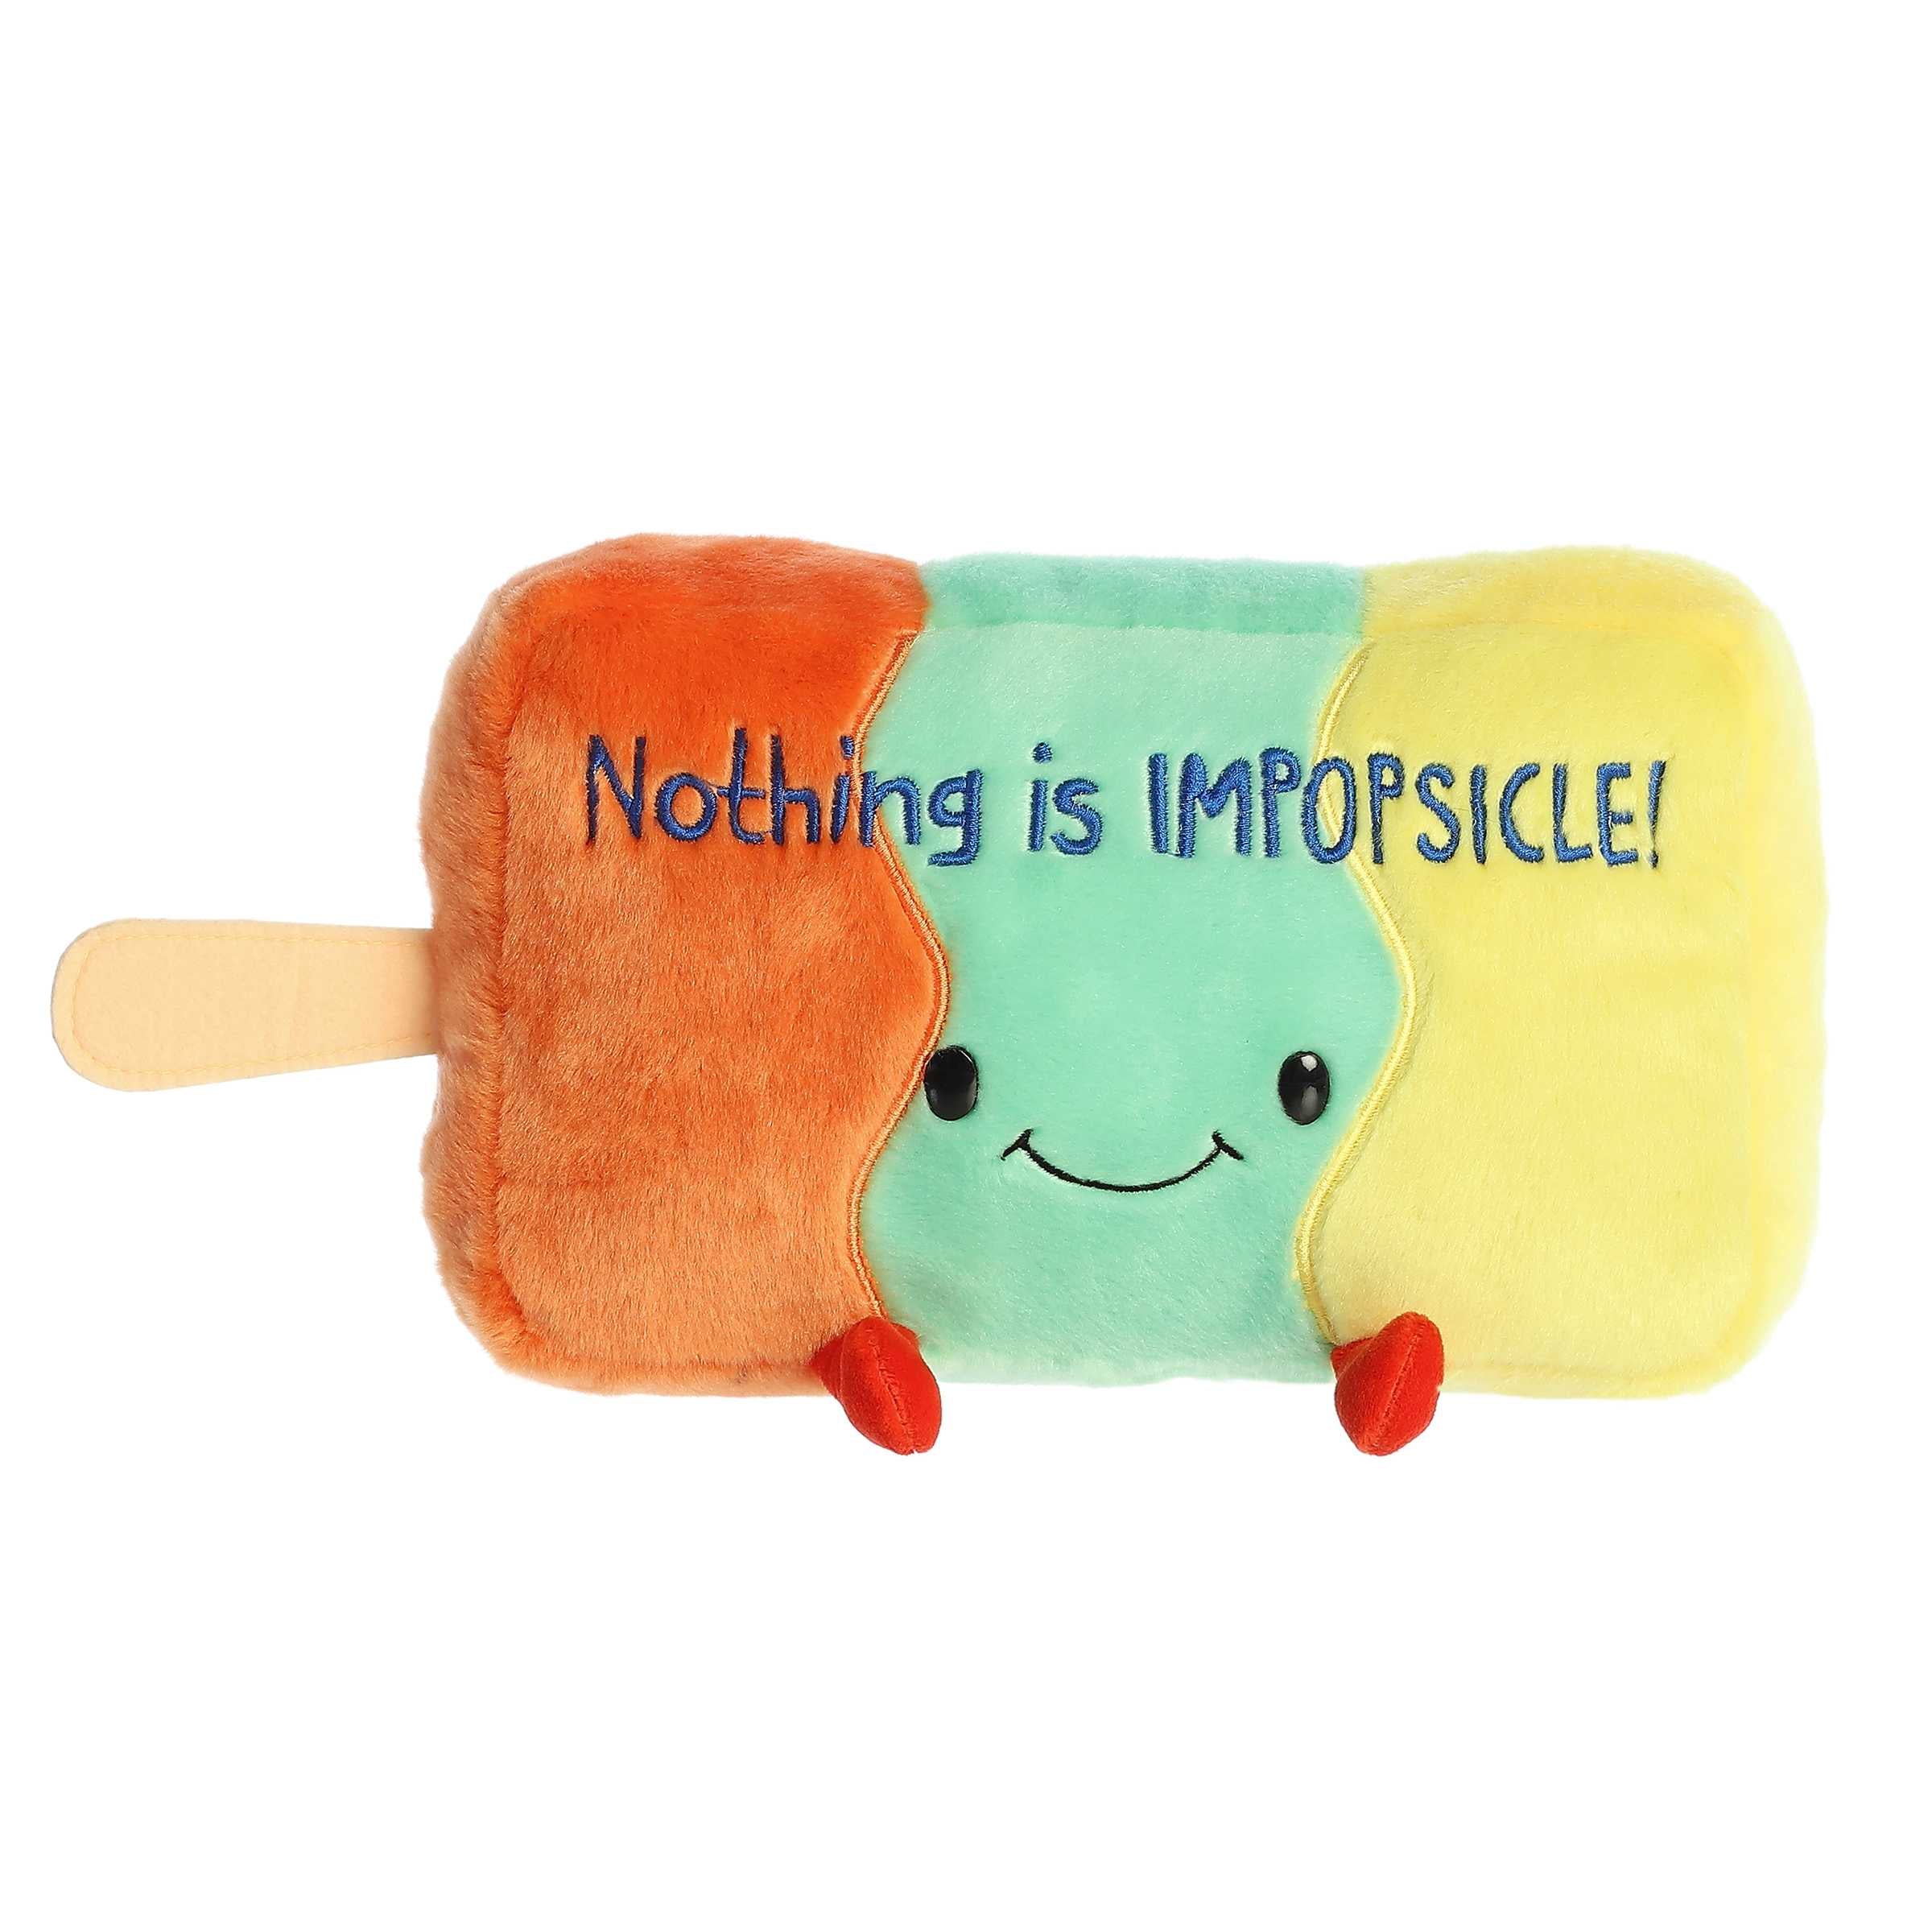 Cute popsicle plush with orange, green and yellow body, "Nothing is IMPOPSICLE" pun written across and a smiling face design